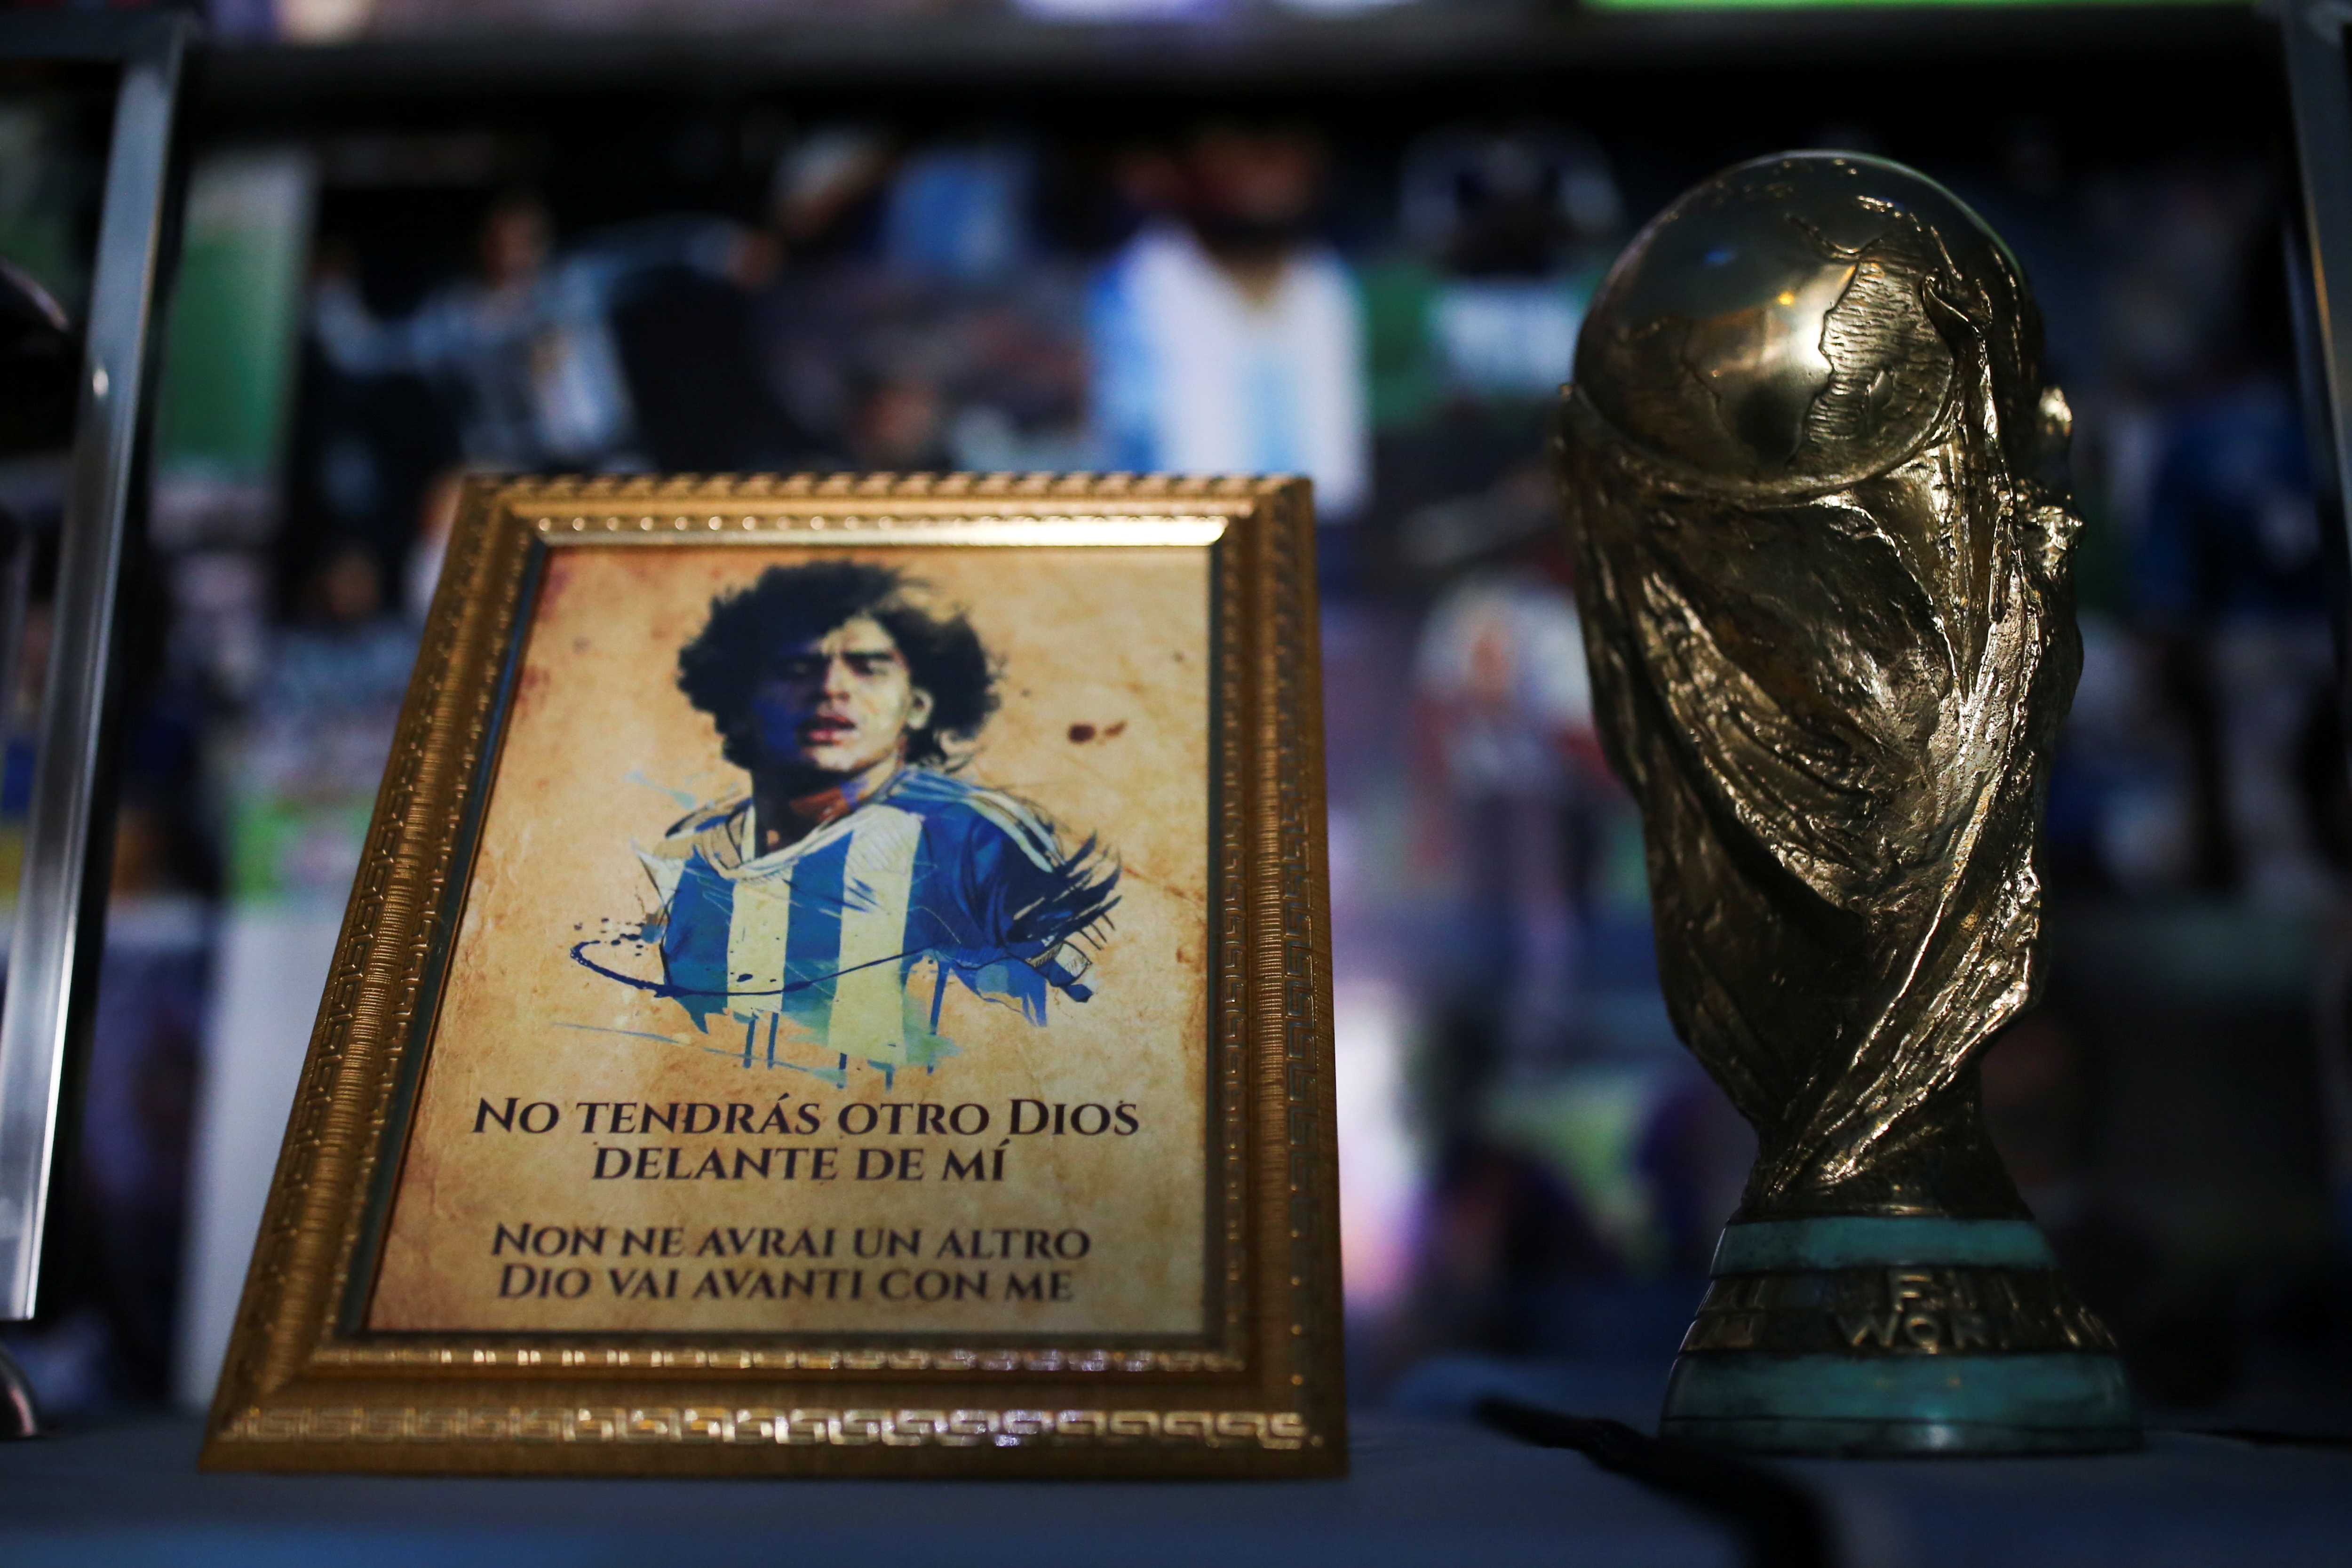 A Maradona's picture and an replica of the World Cup trophy are pictured on an altar at the first Mexico's church in memory of soccer legend Diego Armando Maradona in San Andres Cholula